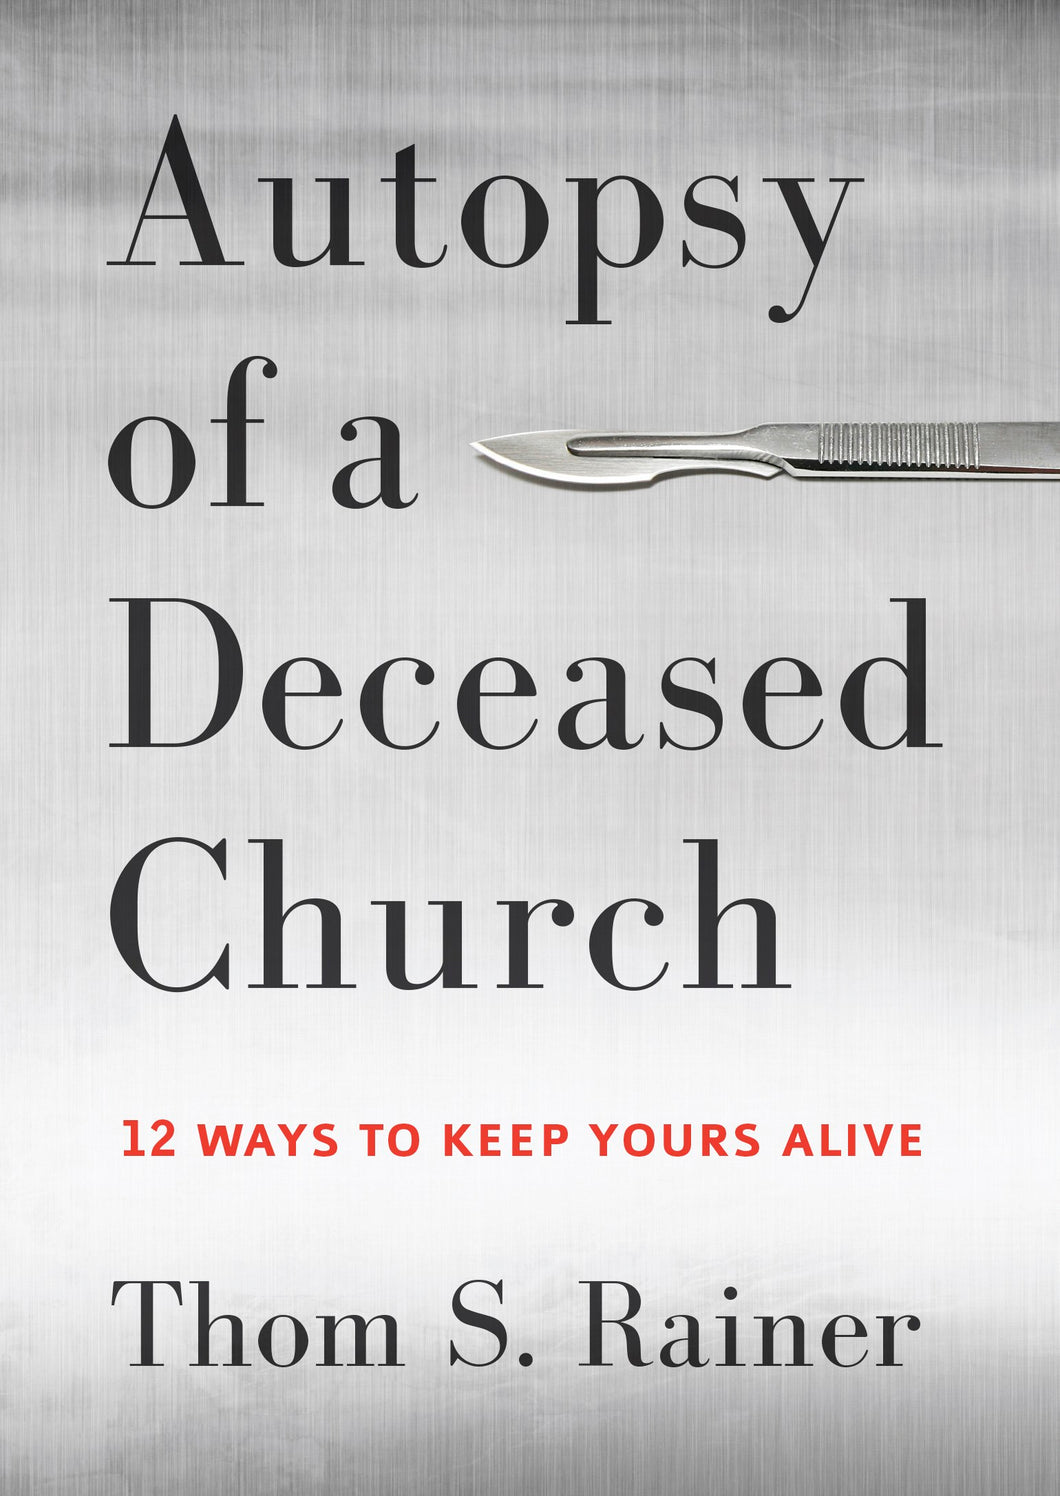 Autopsy Of A Deceased Church